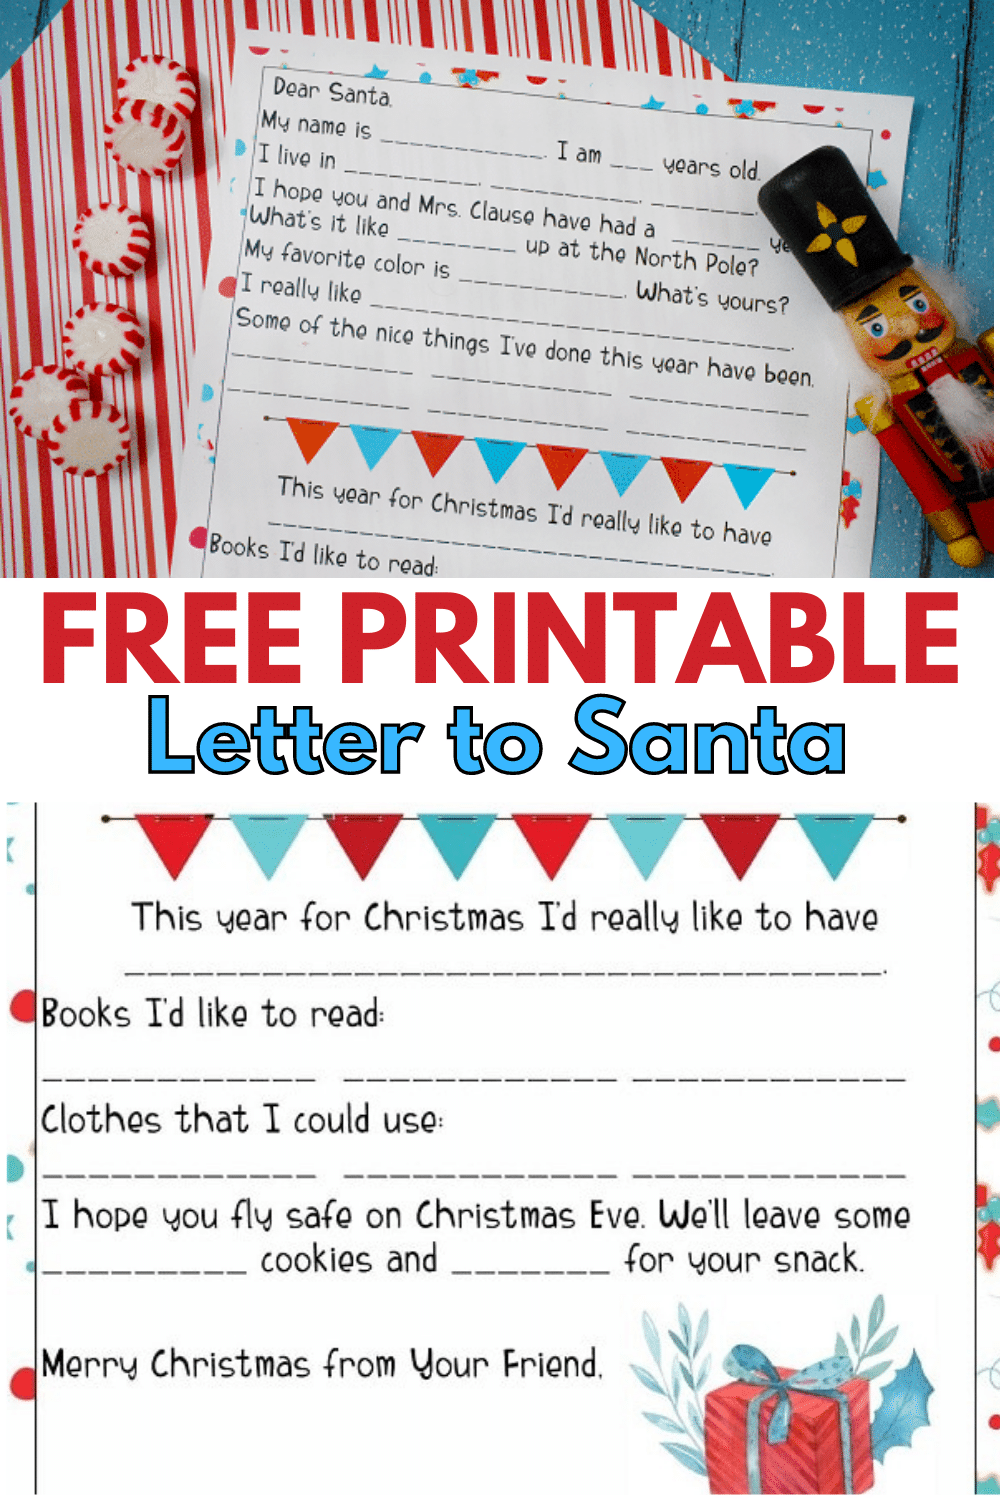 This free printable letter to Santa is not only perfect for gathering your child's Christmas wish list, but also for reinforcing good habits and behaviors. Plus, it makes a great keepsake! #LetterToSanta #printable via @wondermomwannab